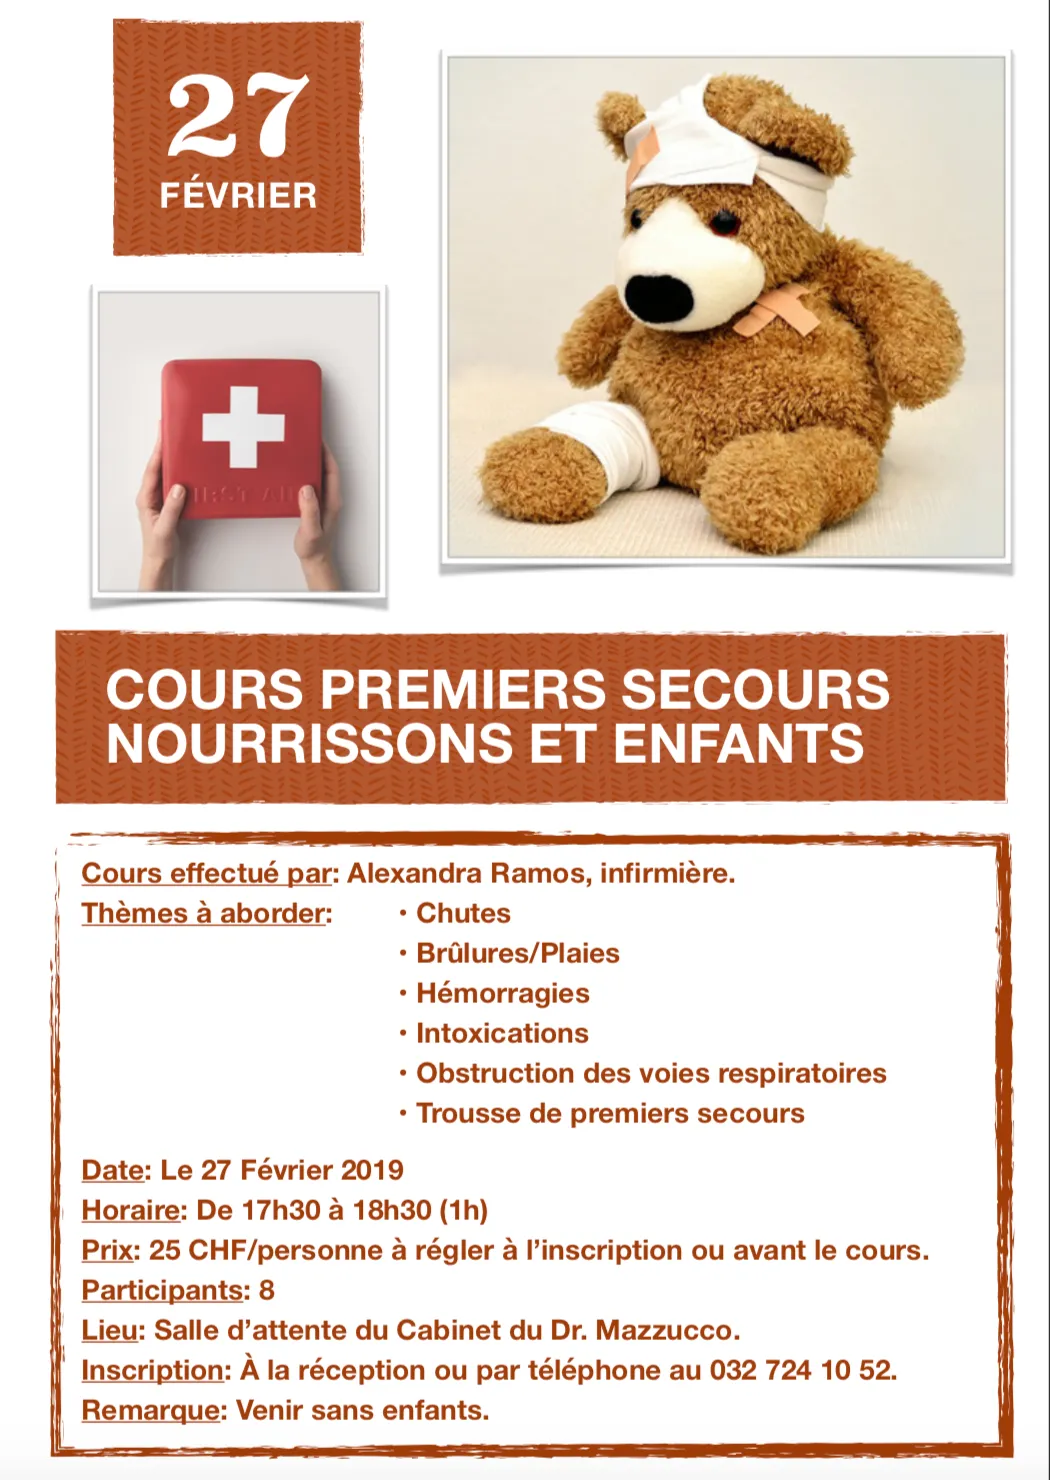 First aid course for children and infants